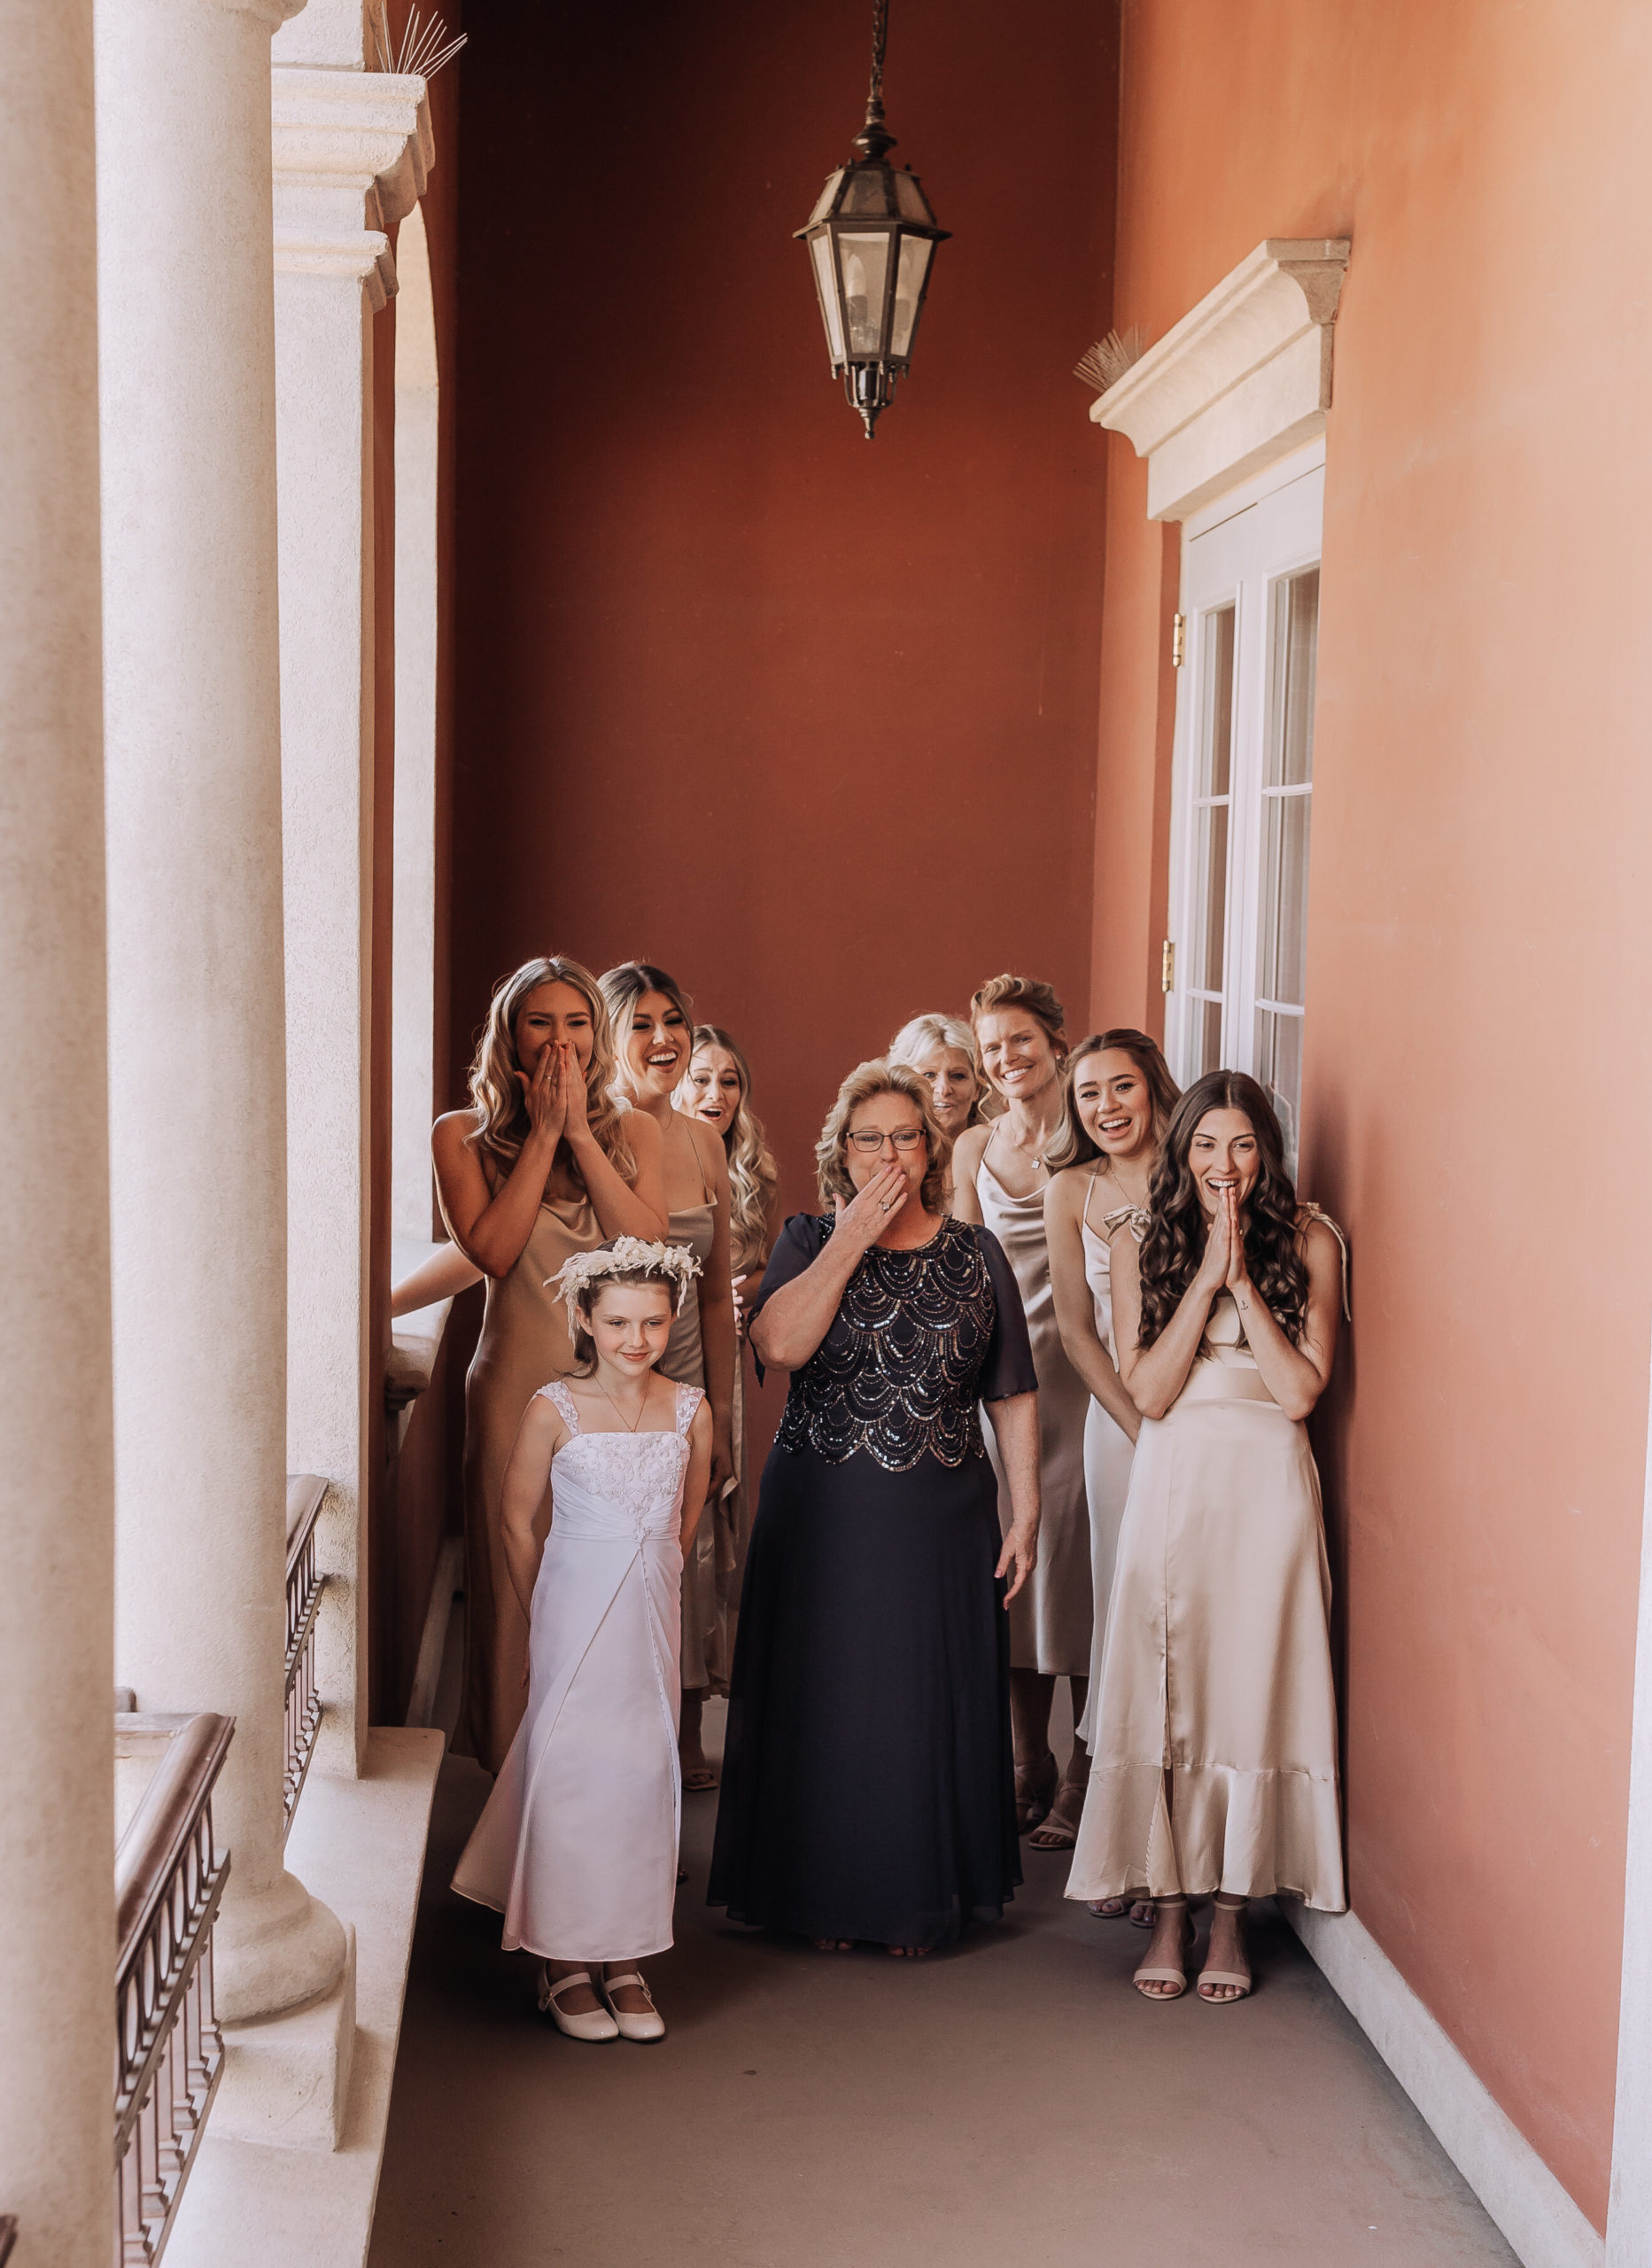 The bridal party and mother of the bride in awe of the bride 